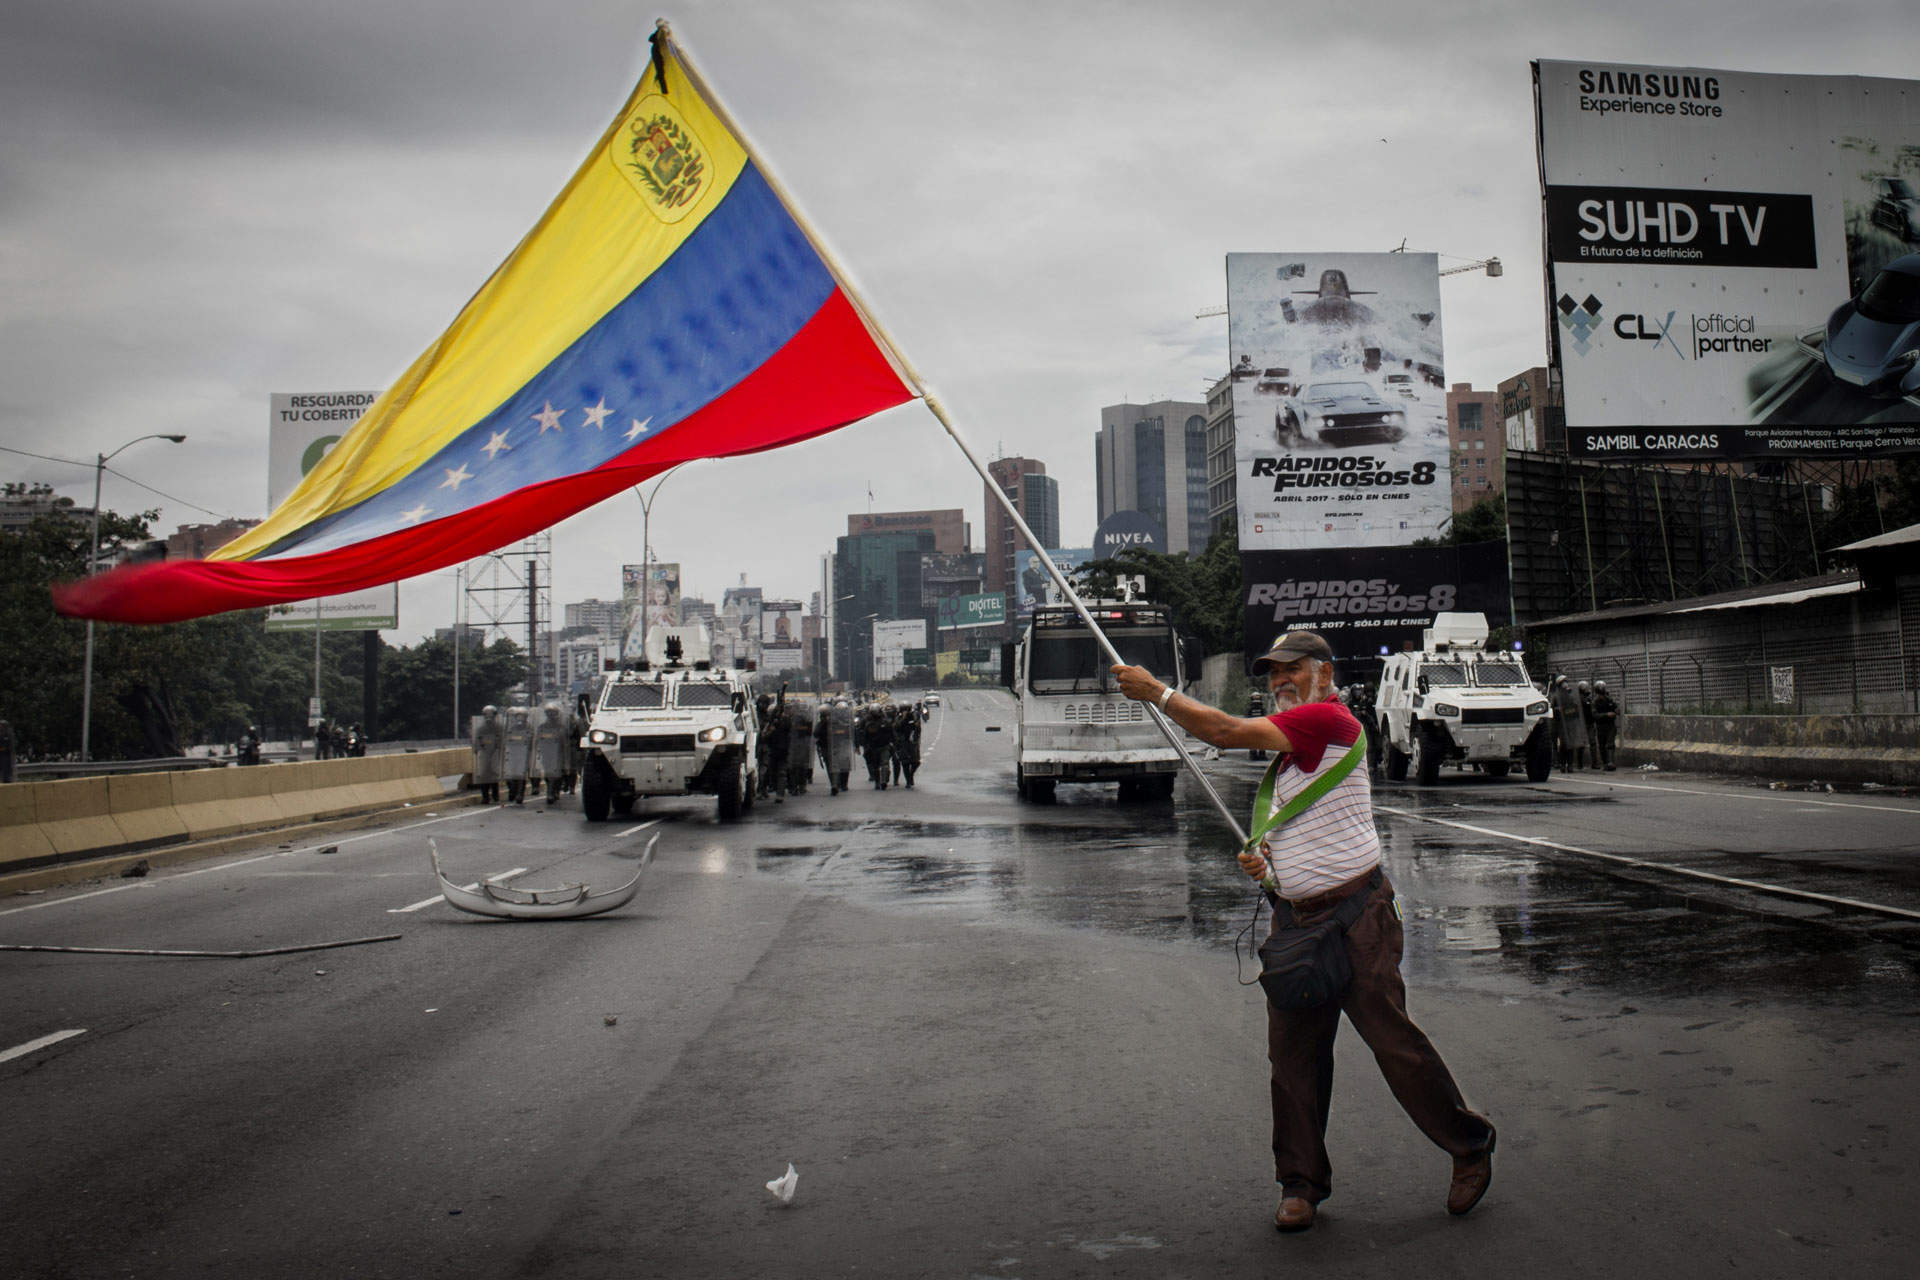 Venezuela currency: Cryptocurrency and sovereign bolivar efforts “just won’t work”